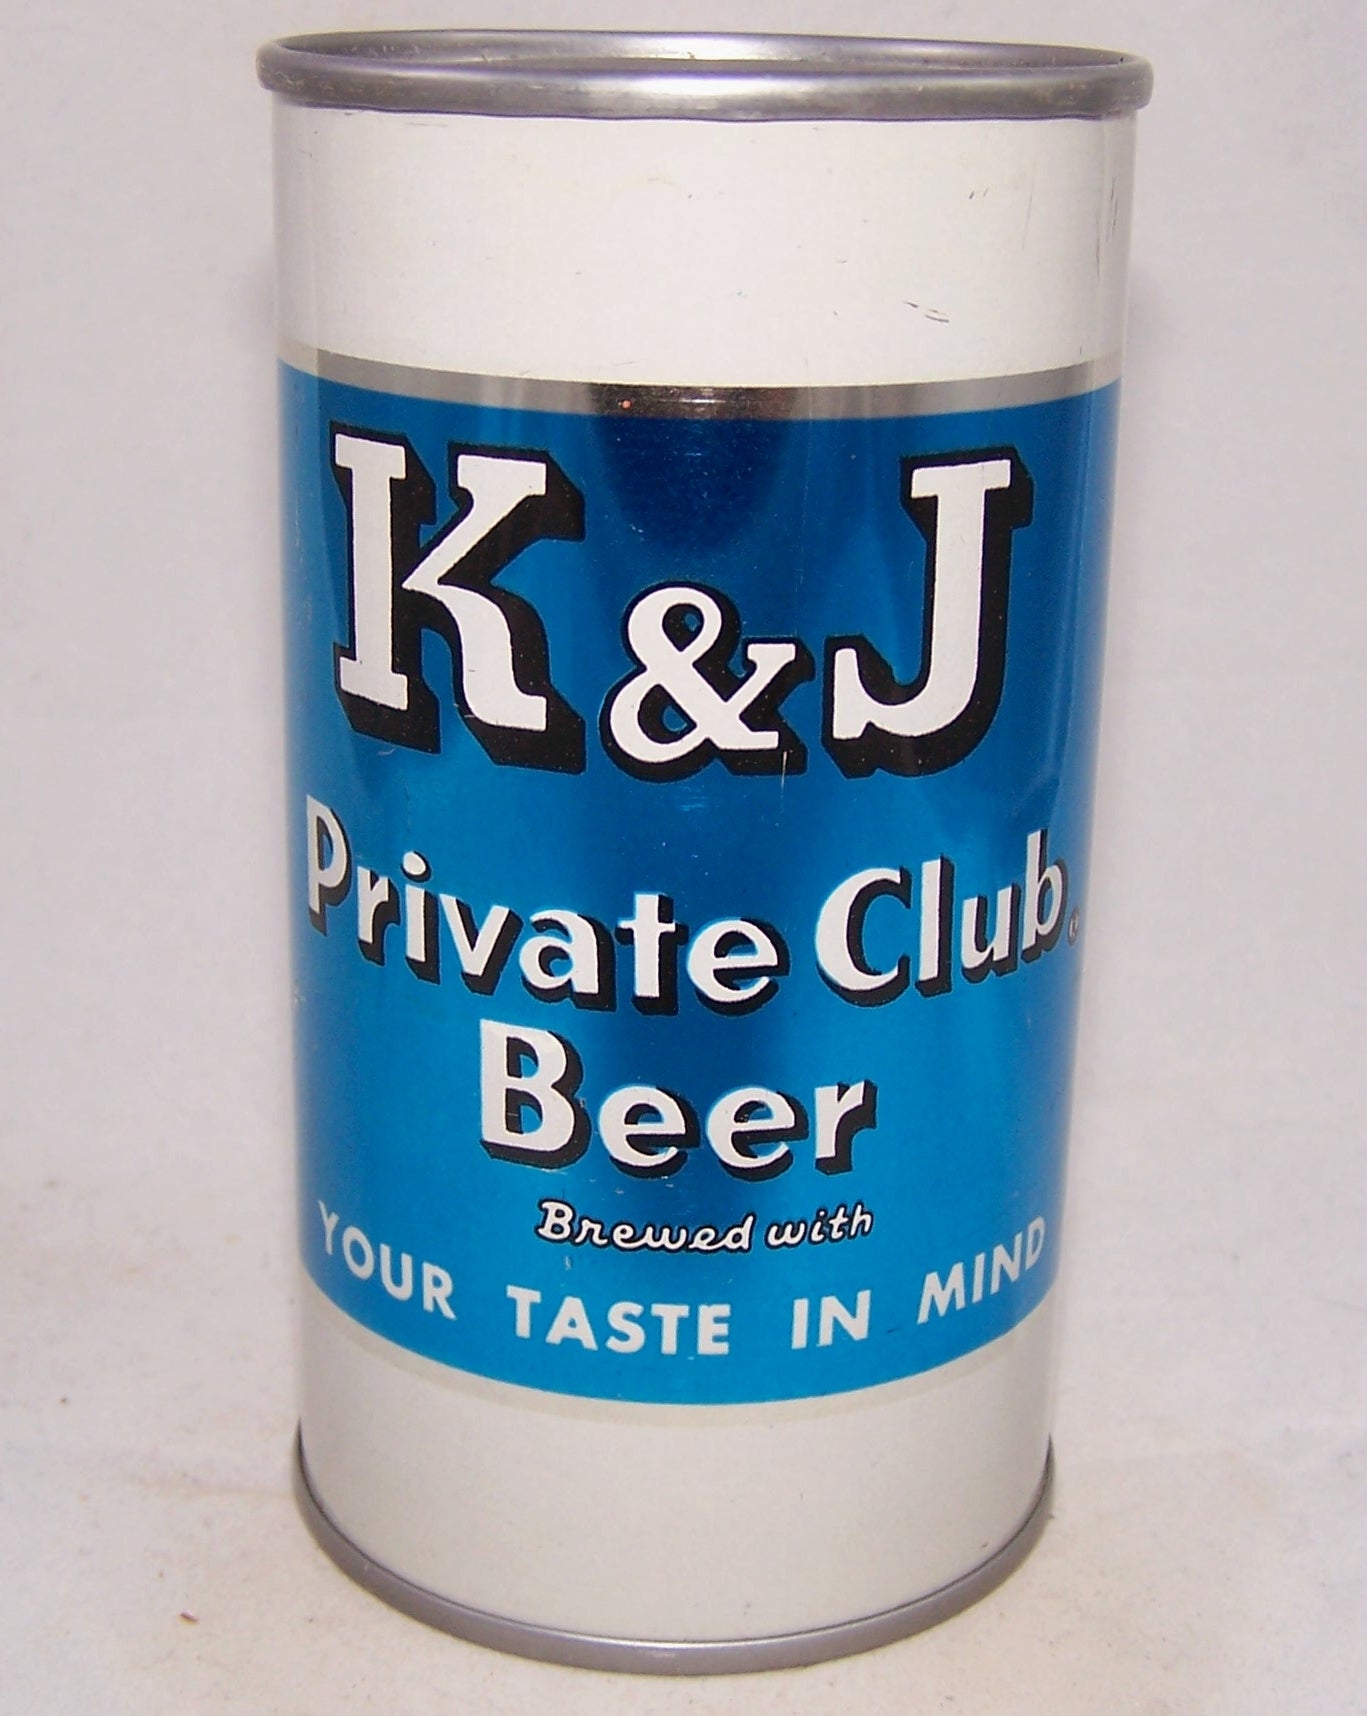 K&J Private Club Beer, USBC 88-20, Grade 1/1+ Sold on 8/31/19